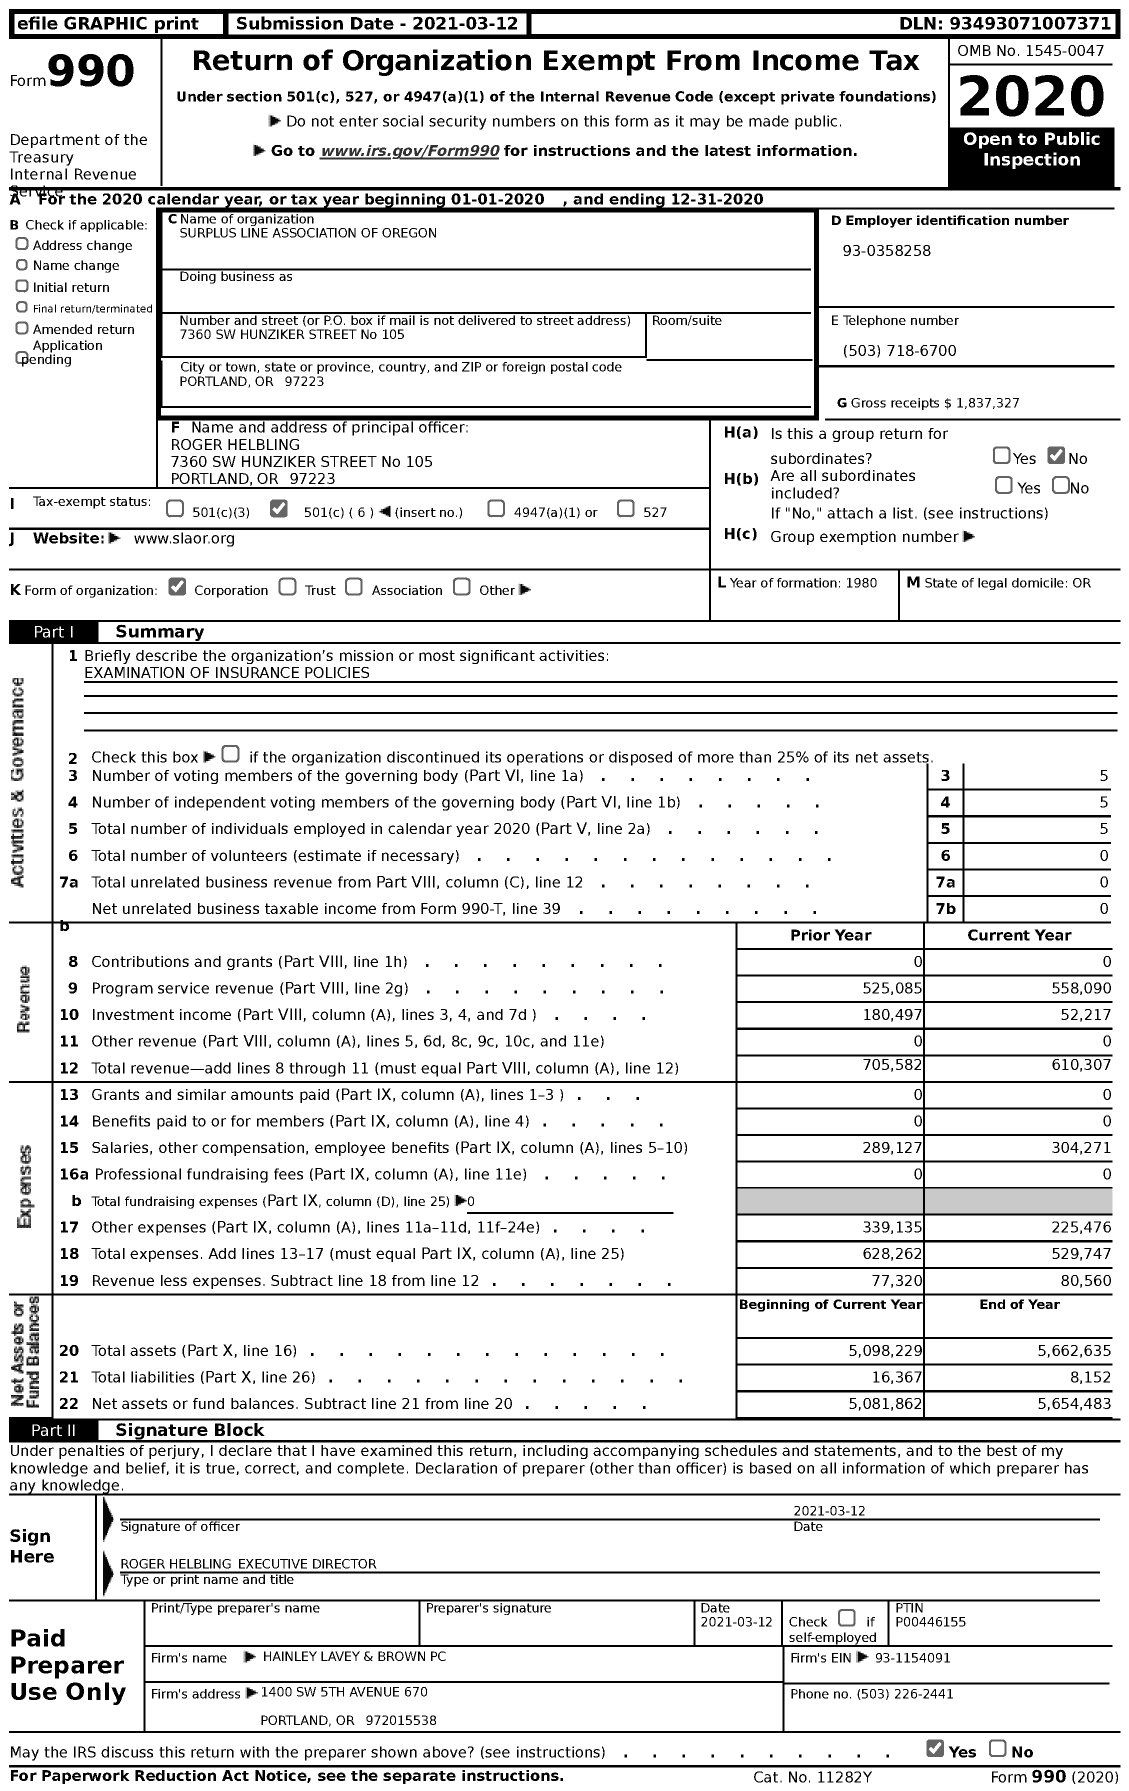 Image of first page of 2020 Form 990 for Surplus Line Association of Oregon